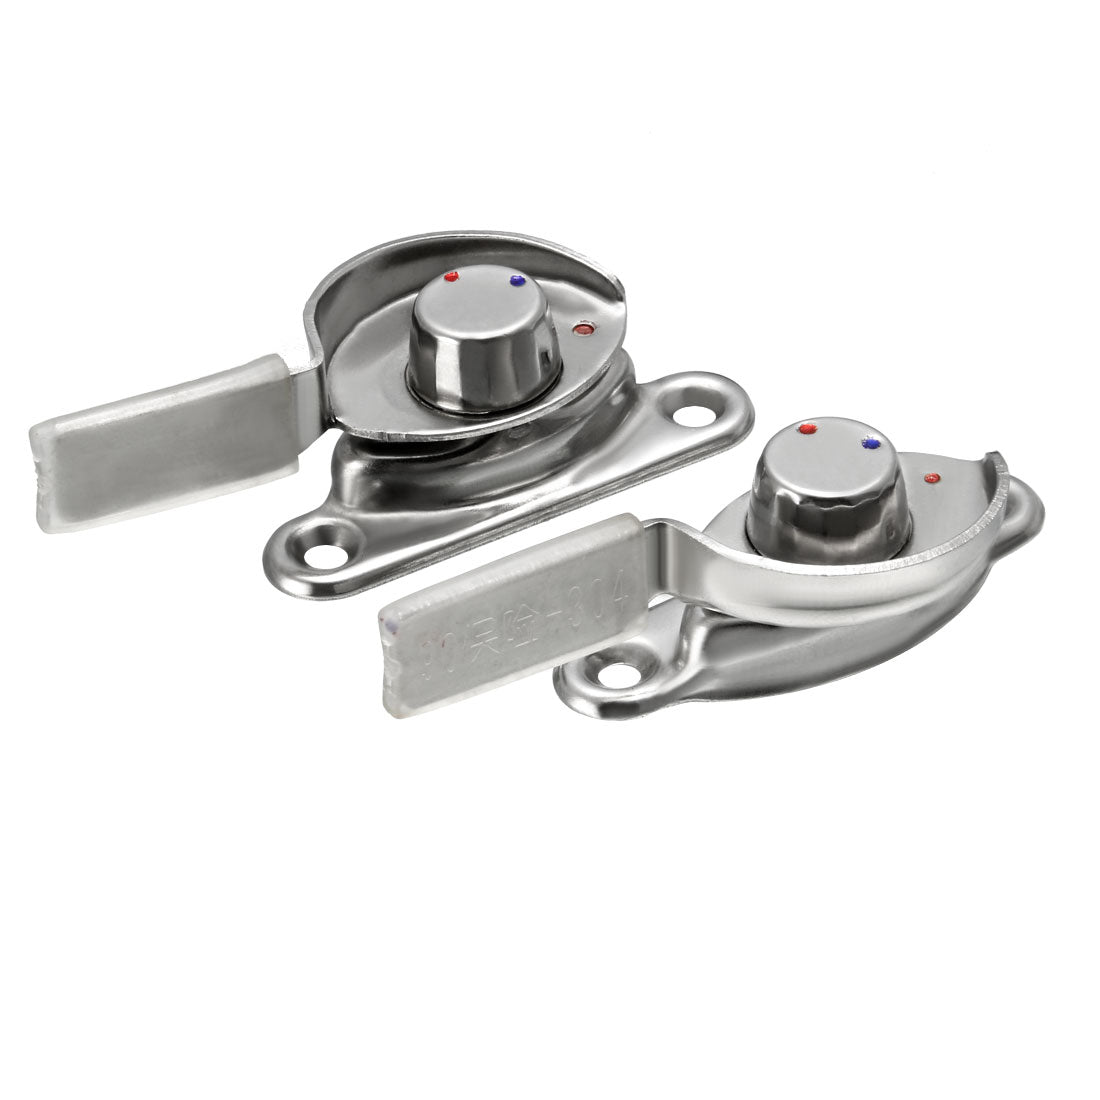 uxcell Uxcell 2pcs Window Sash Lock Knob Locking Chrome Plated Spring Action Right Left Hand